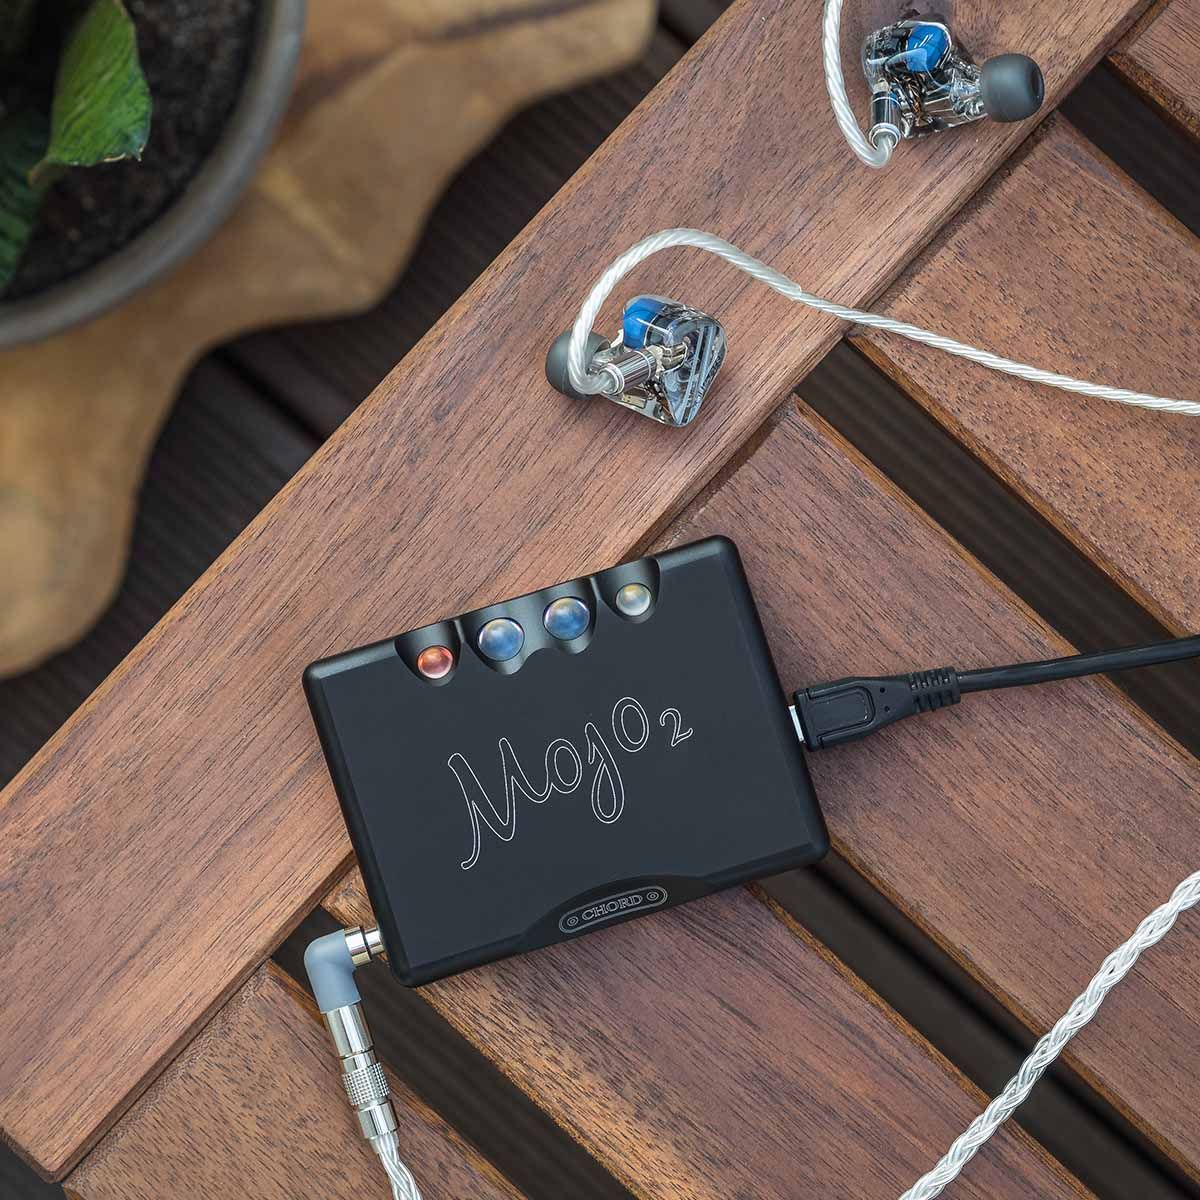 Chord Mojo 2 connected to in-ear headphones sitting on outdoor table